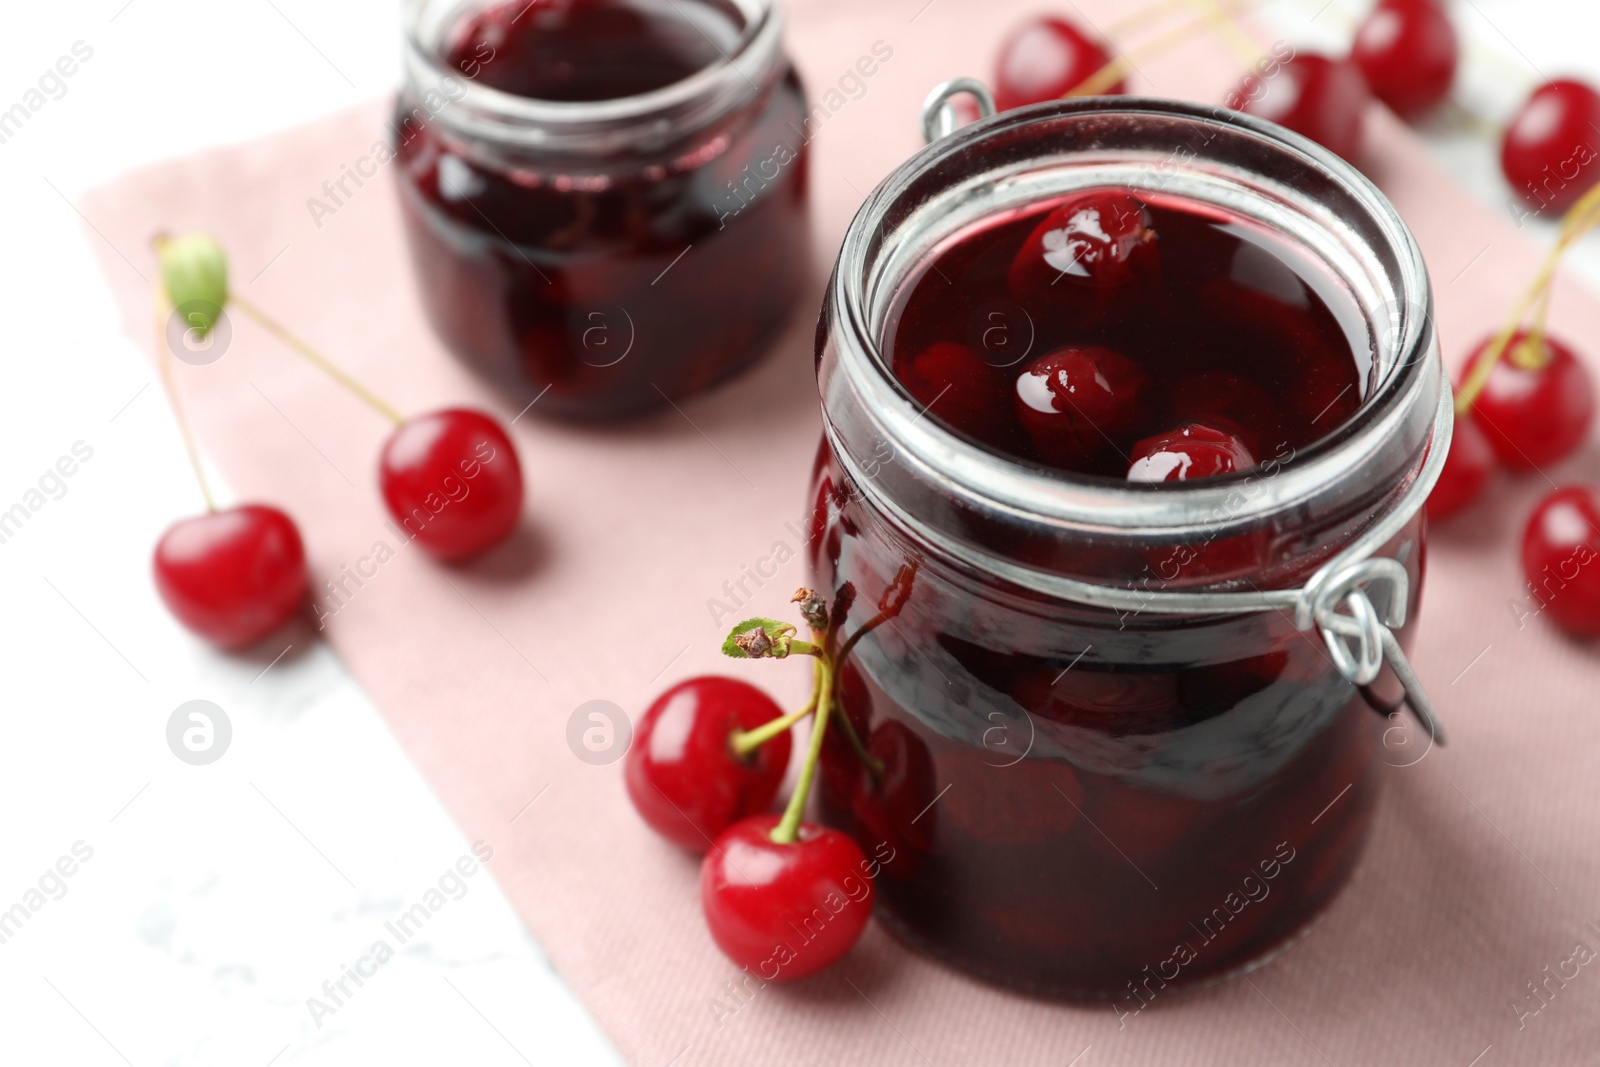 Photo of Jars of pickled cherries and fresh fruits on table, closeup